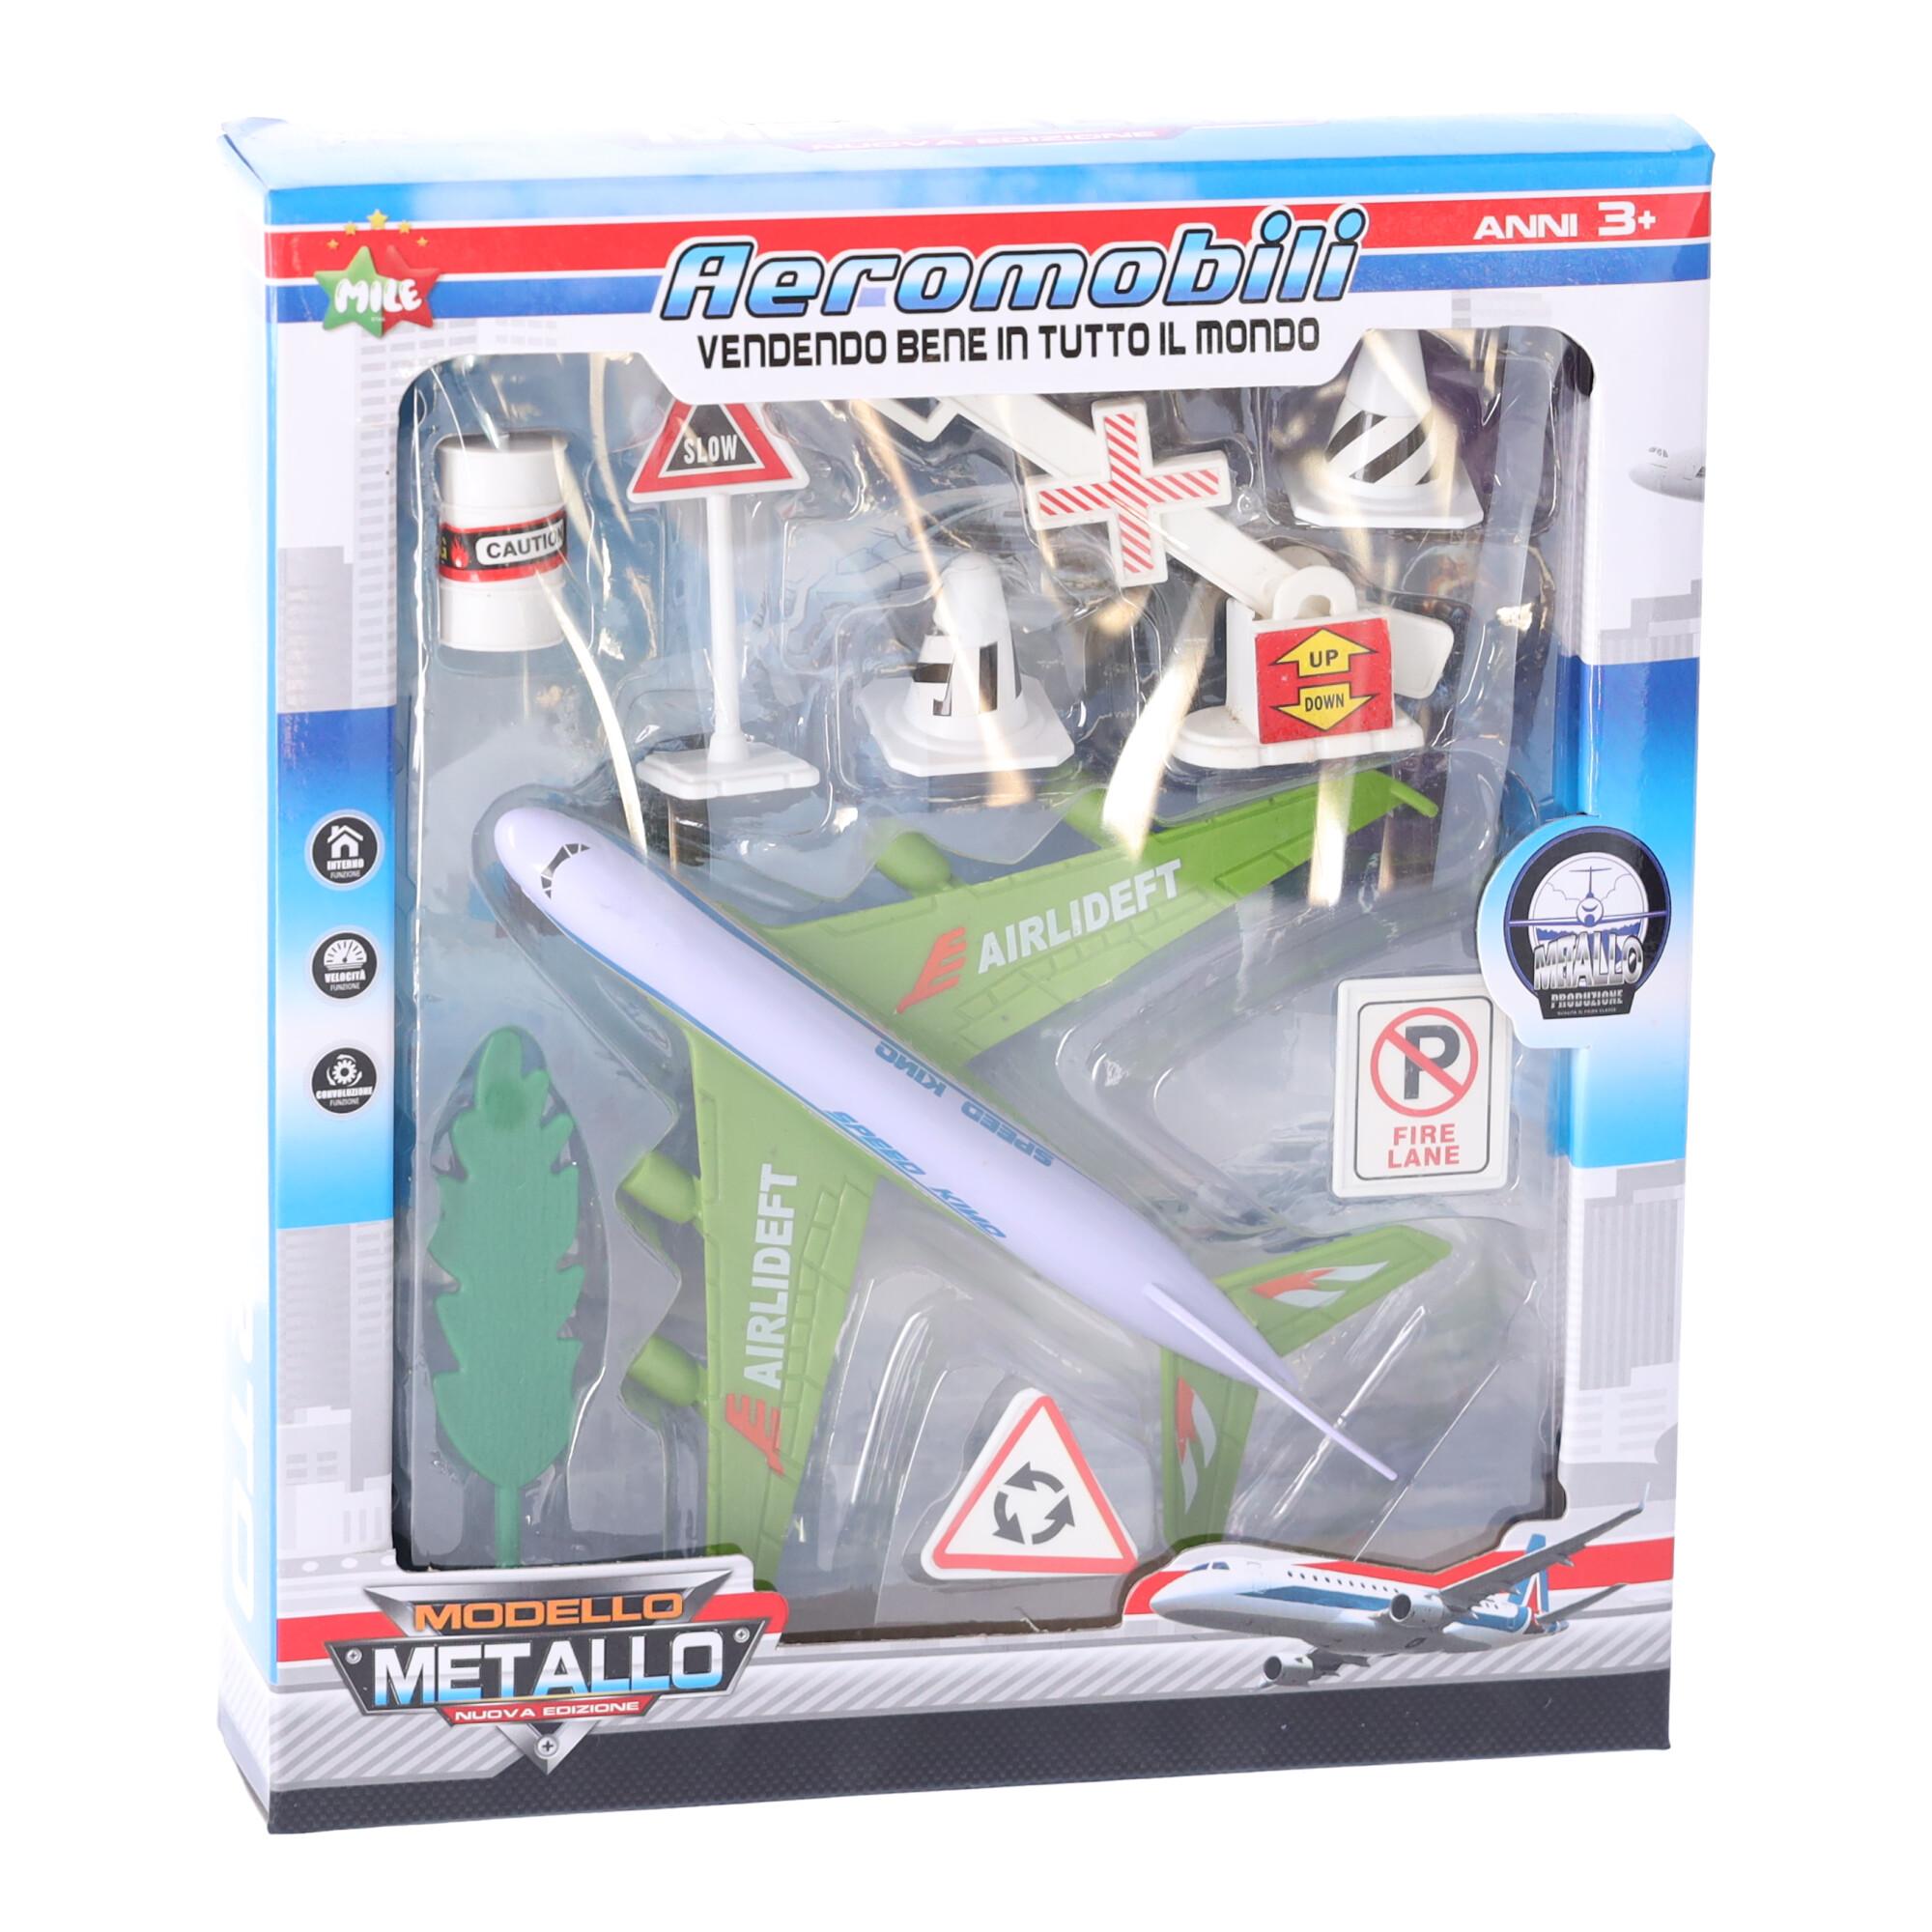 Toy plane with accessories